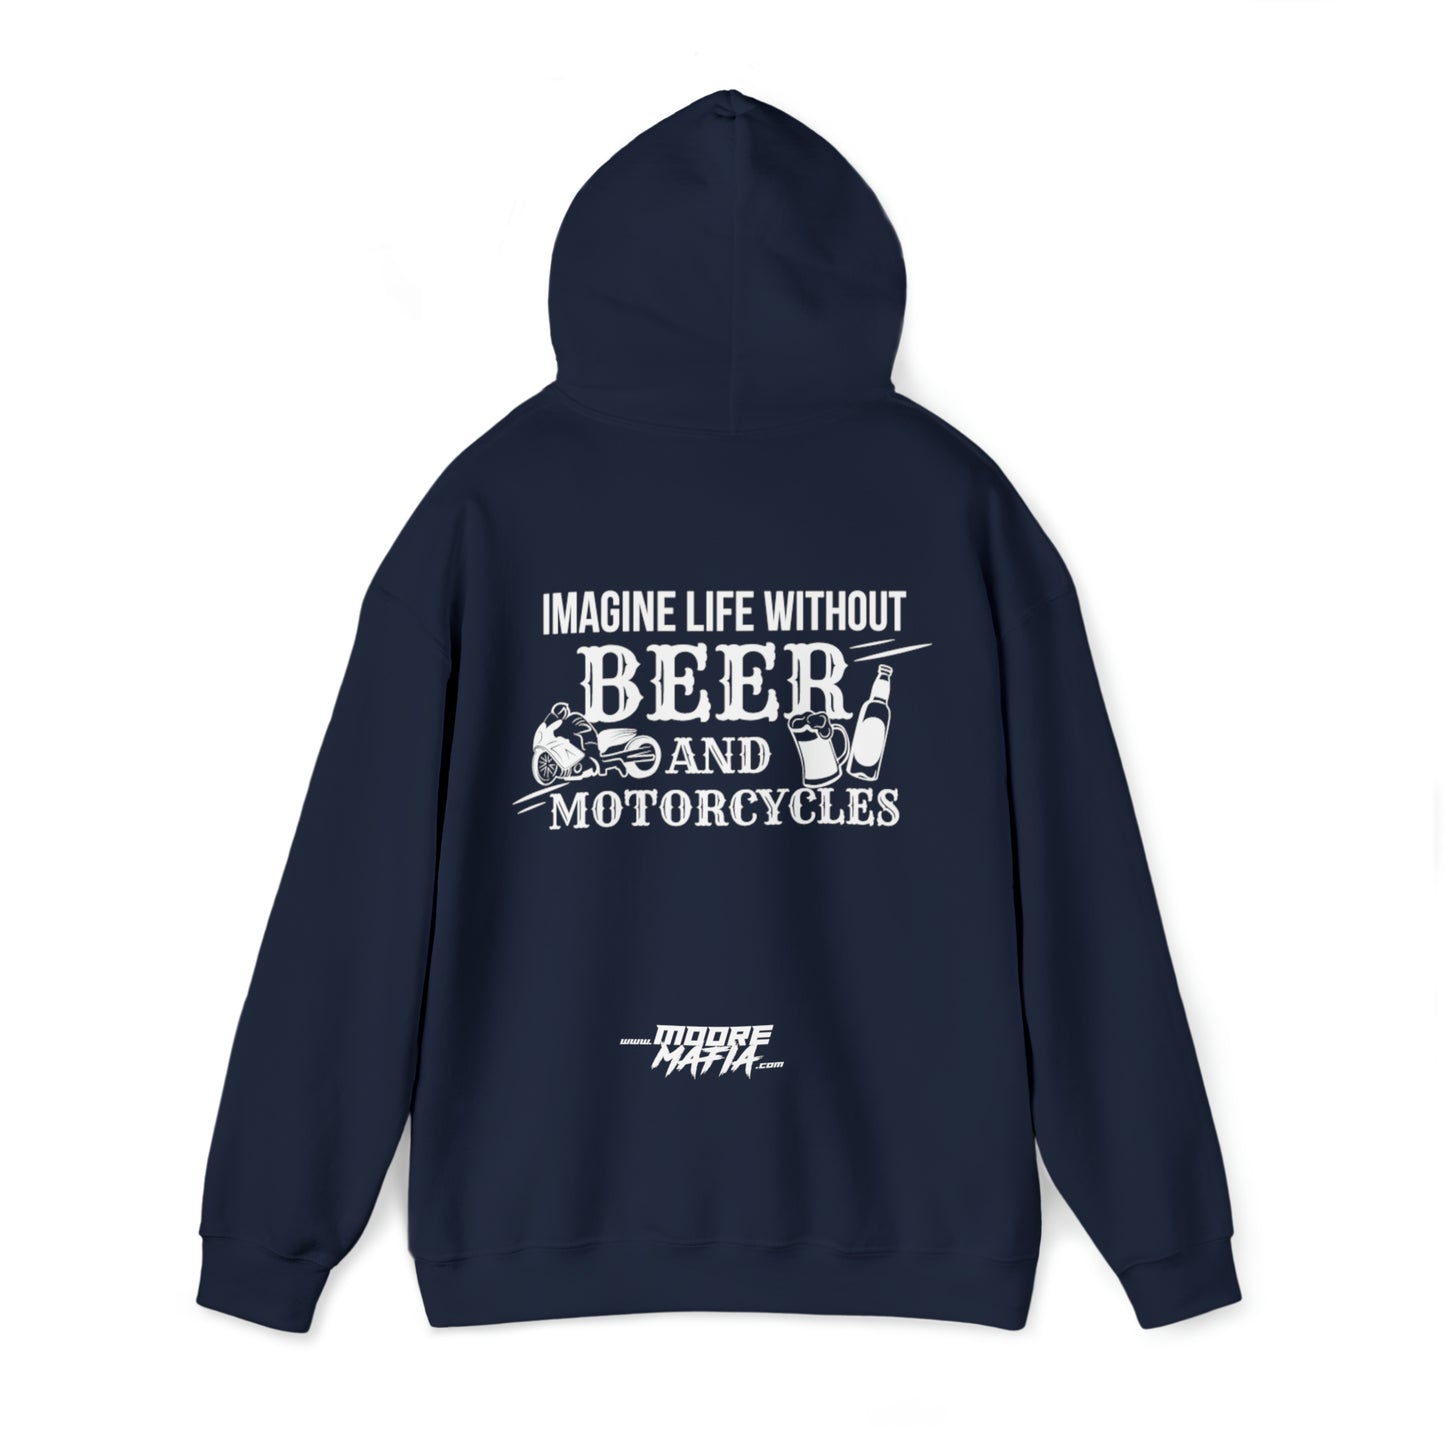 Life Without Beer And Motorcycles Hooded Sweatshirt